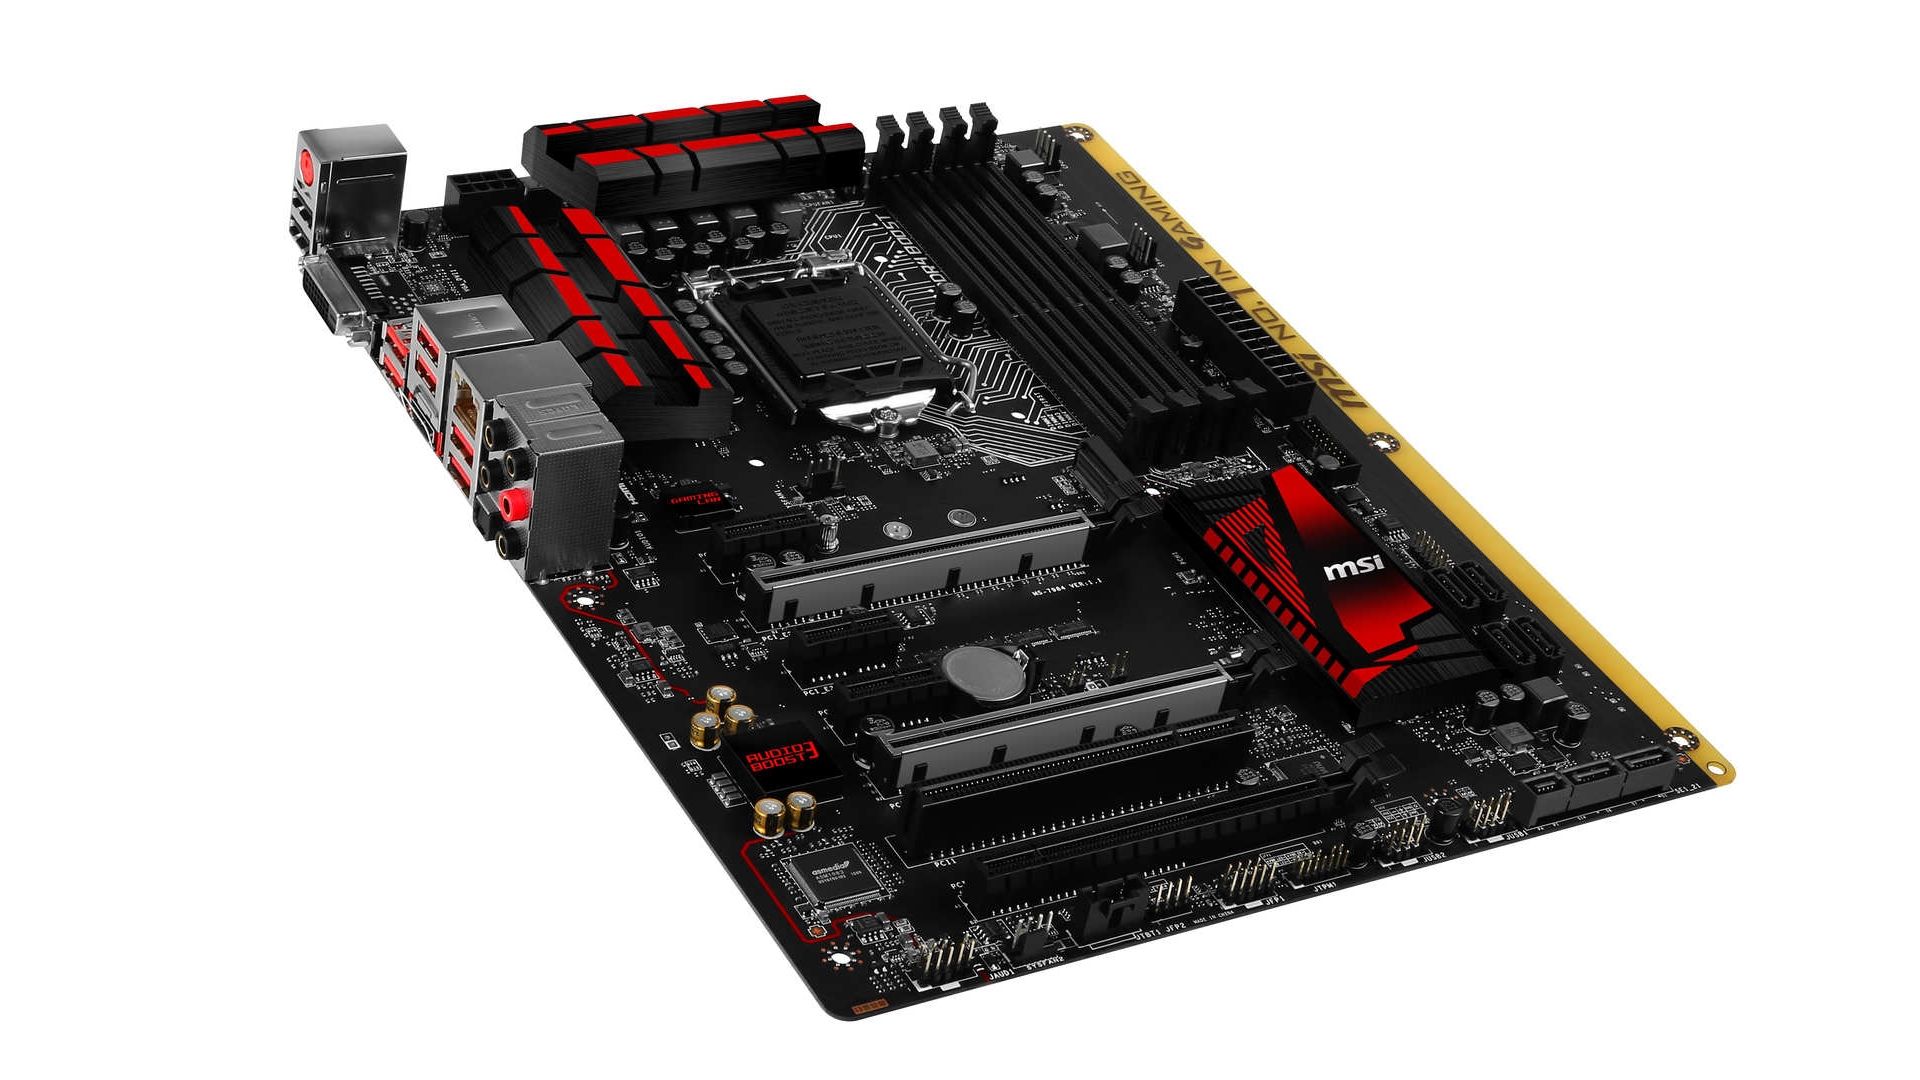 Red pro gaming. Материнская плата MSI 1151. LGA 1151 материнская плата MSI. Материнская плата MSI 880g-e45. MSI z170a Gaming Pro.